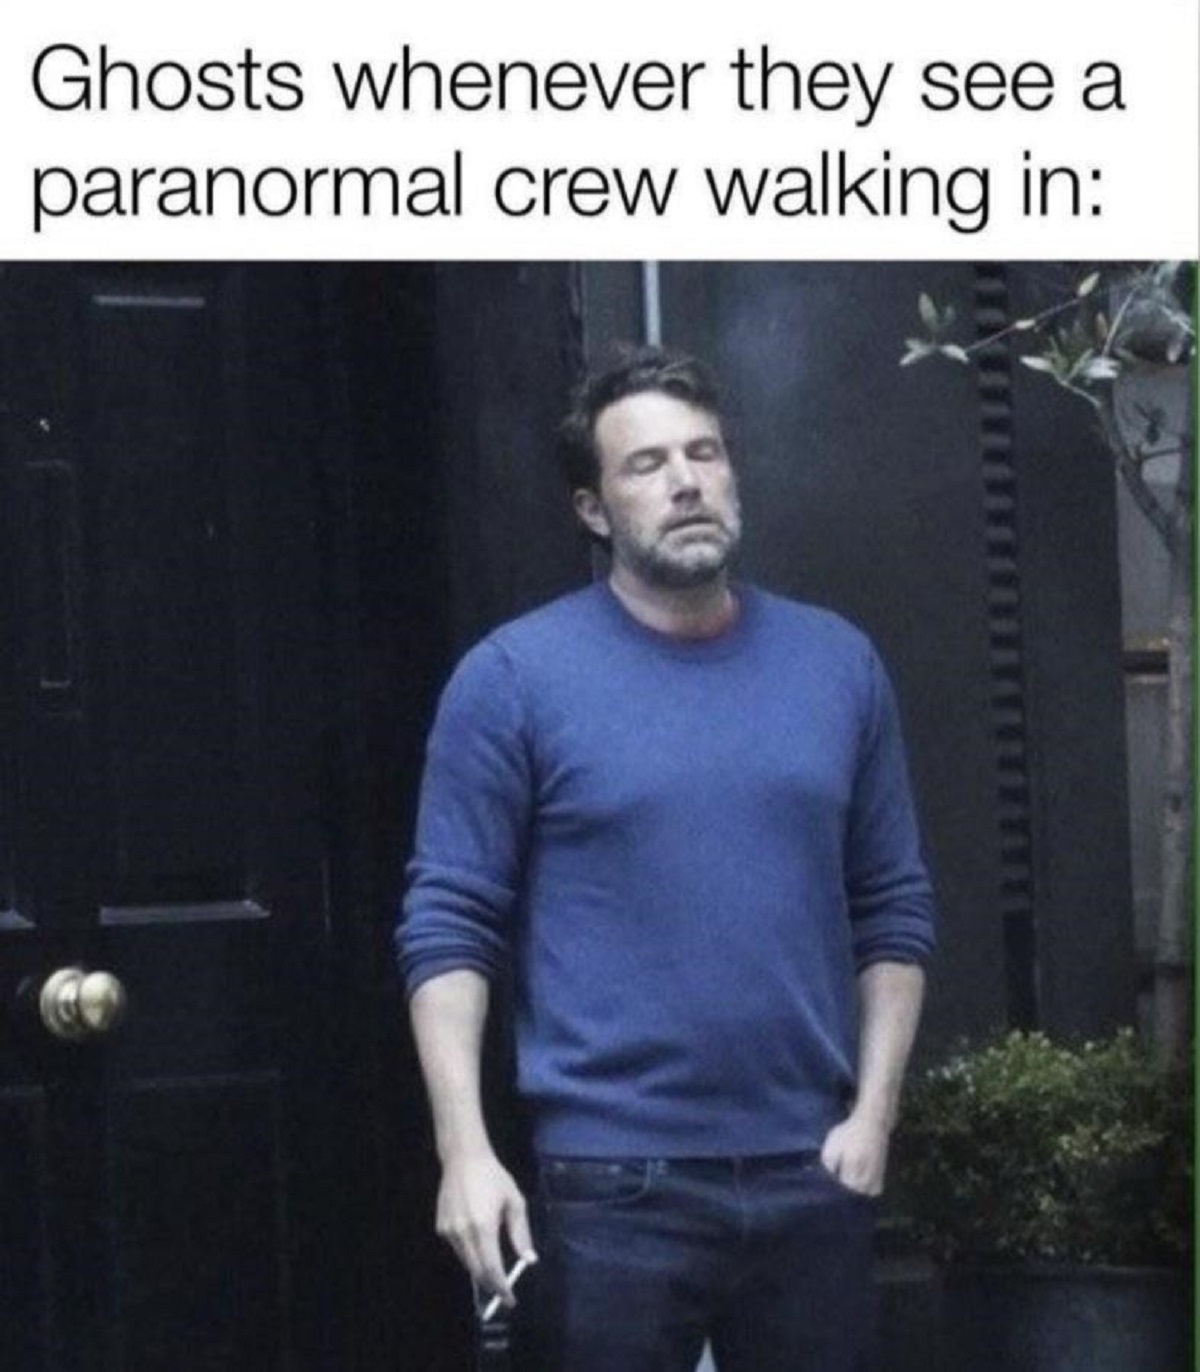 you hear hey you re a computer person right - Ghosts whenever they see a paranormal crew walking in